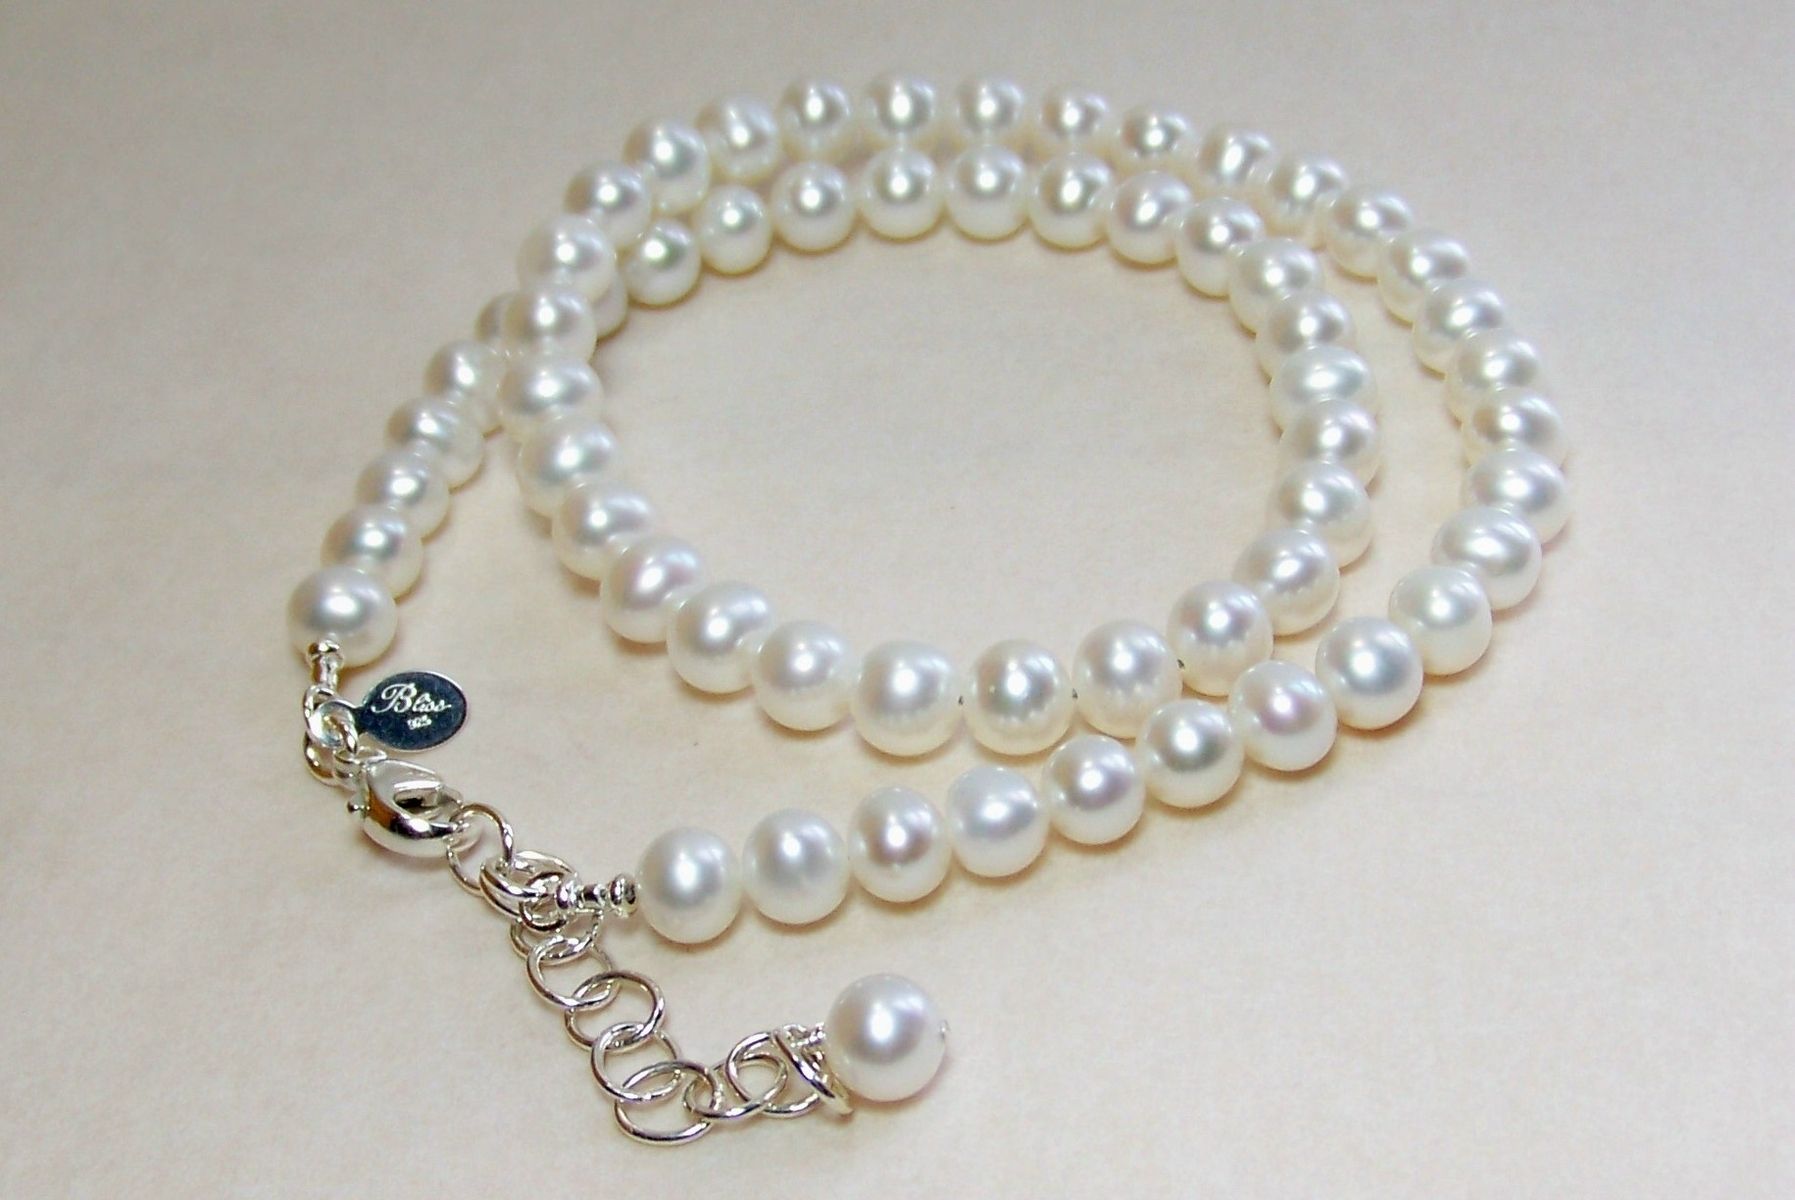 Handmade Pearl Necklace With Sterling Silver by Bliss Designs ...